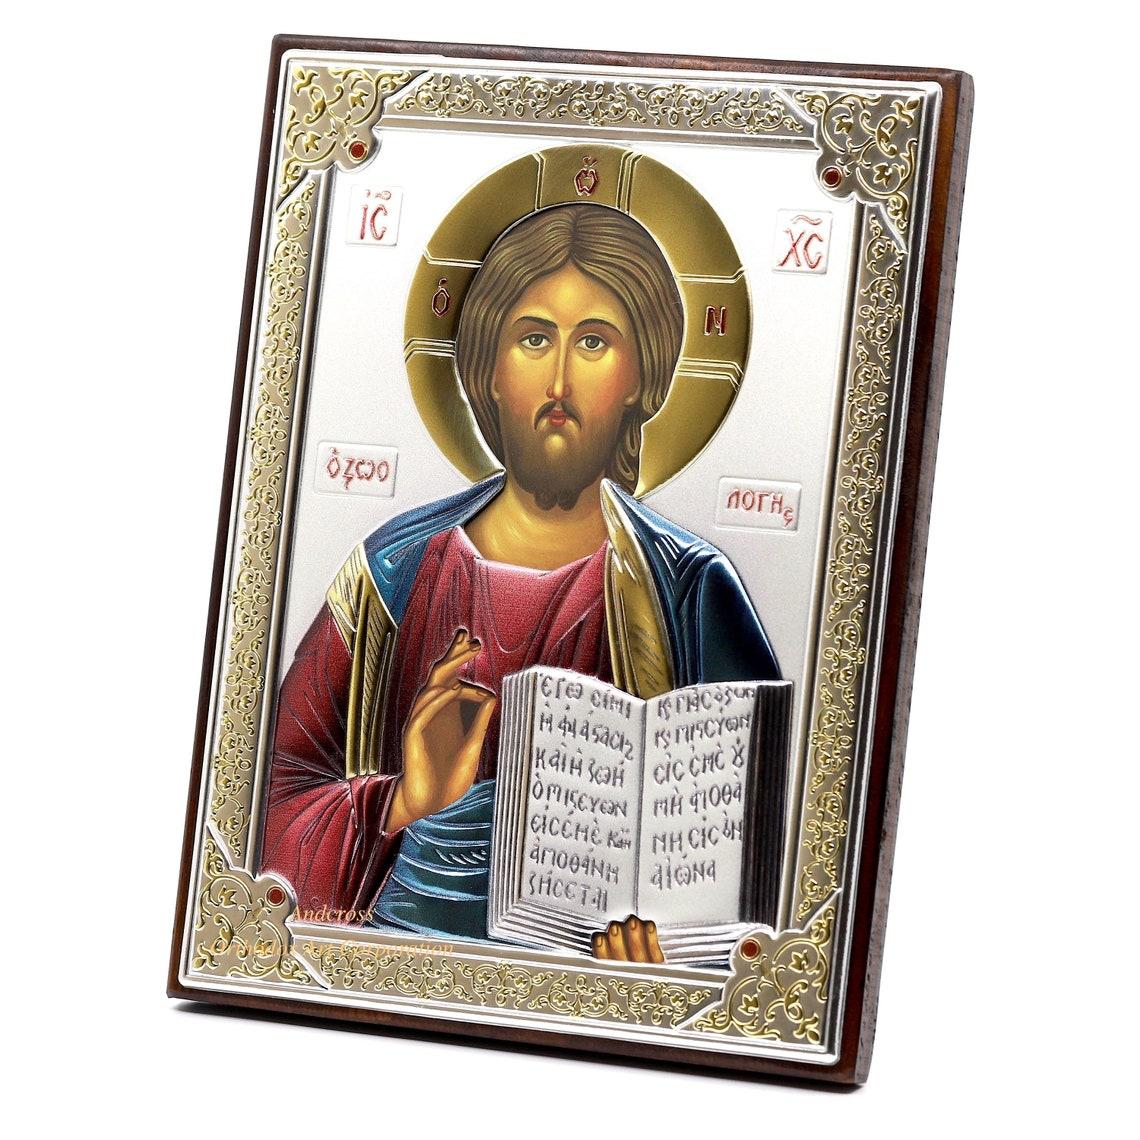 Medium Wooden Russian Orthodox Icon Lord Jesus Christ Pantocrator. Silver Plated .999 Oklad Riza ( 5.12″ X 7.1″ ) 13cm X 18cm. B165|Medium Wooden Russian Orthodox Icon Lord Jesus Christ Pantocrator. Silver Plated .999 Oklad Riza ( 5.12″ X 7.1″ ) 13cm X 18cm. B165|Medium Wooden Russian Orthodox Icon Mother Of God Seven Arrows. Silver Plated .999 Oklad Riza ( 5.12″ X 7.1″ ) 13cm X 18cm. B164|Medium Wooden Russian Orthodox Icon Mother Of God Seven Arrows. Silver Plated .999 Oklad Riza ( 5.12″ X 7.1″ ) 13cm X 18cm. B164|Medium Wooden Russian Orthodox Icon Mother Of God Seven Arrows. Silver Plated .999 Oklad Riza ( 5.12″ X 7.1″ ) 13cm X 18cm. B164|Medium Wooden Russian Orthodox Icon Mother Of God Seven Arrows. Silver Plated .999 Oklad Riza ( 5.12″ X 7.1″ ) 13cm X 18cm. B164